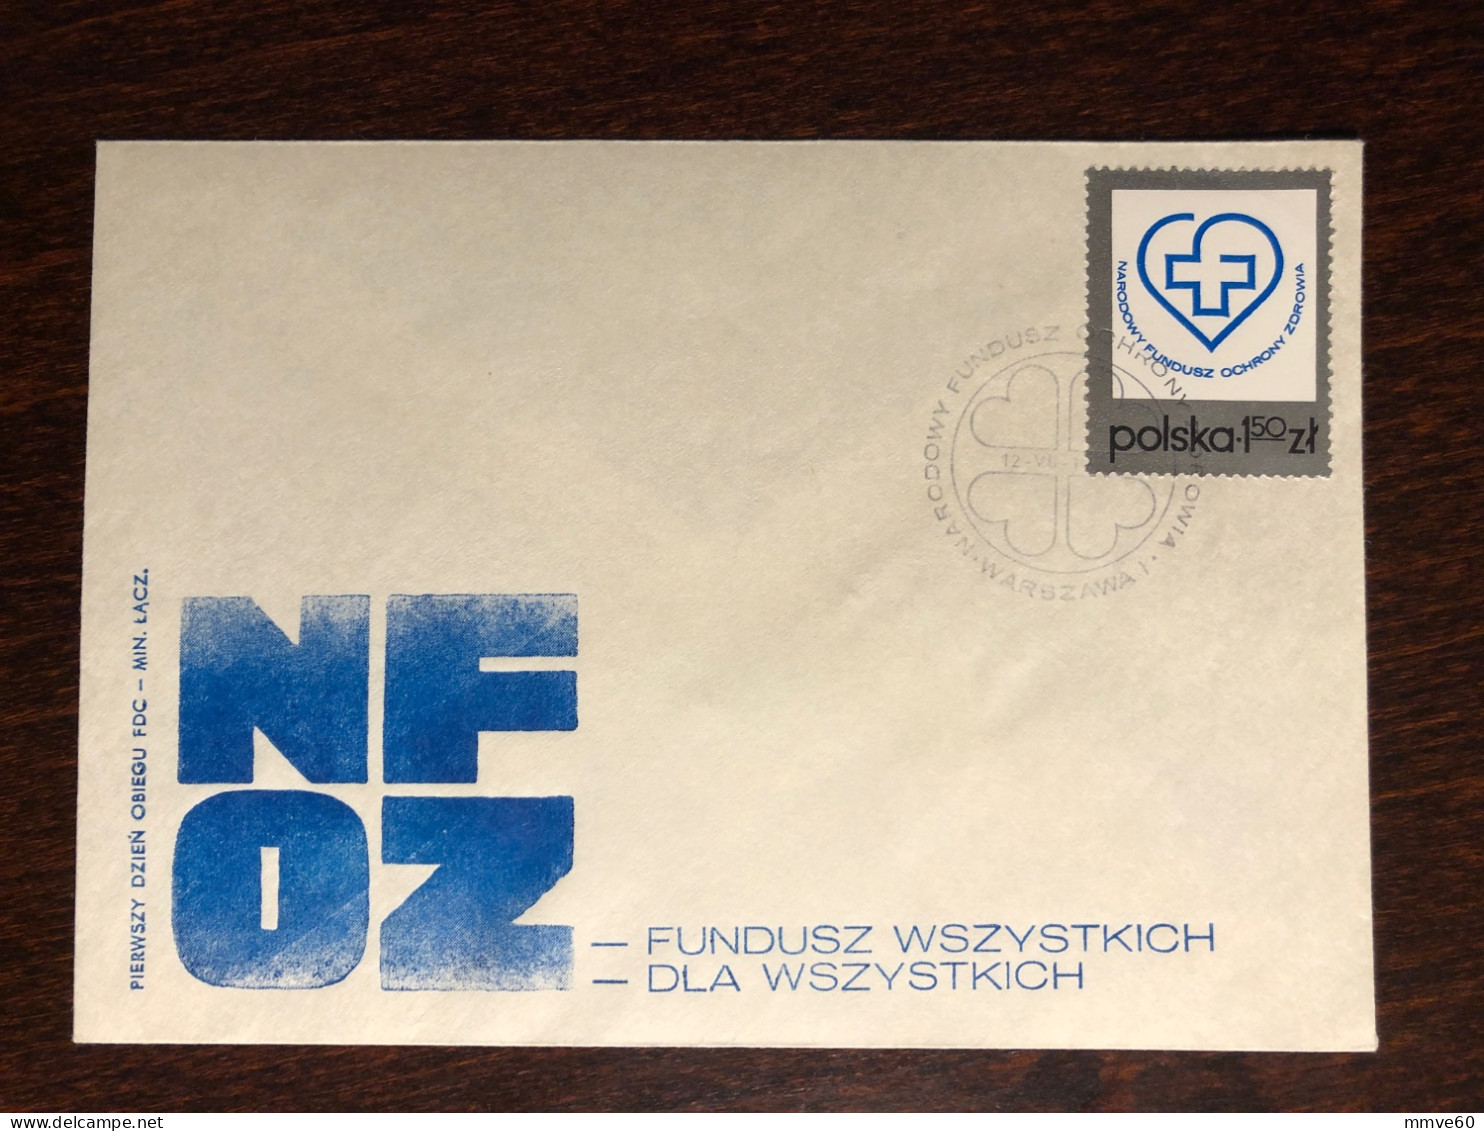 POLAND FDC COVER 1975 YEAR HEALTH FUND HEALTH MEDICINE STAMPS - FDC